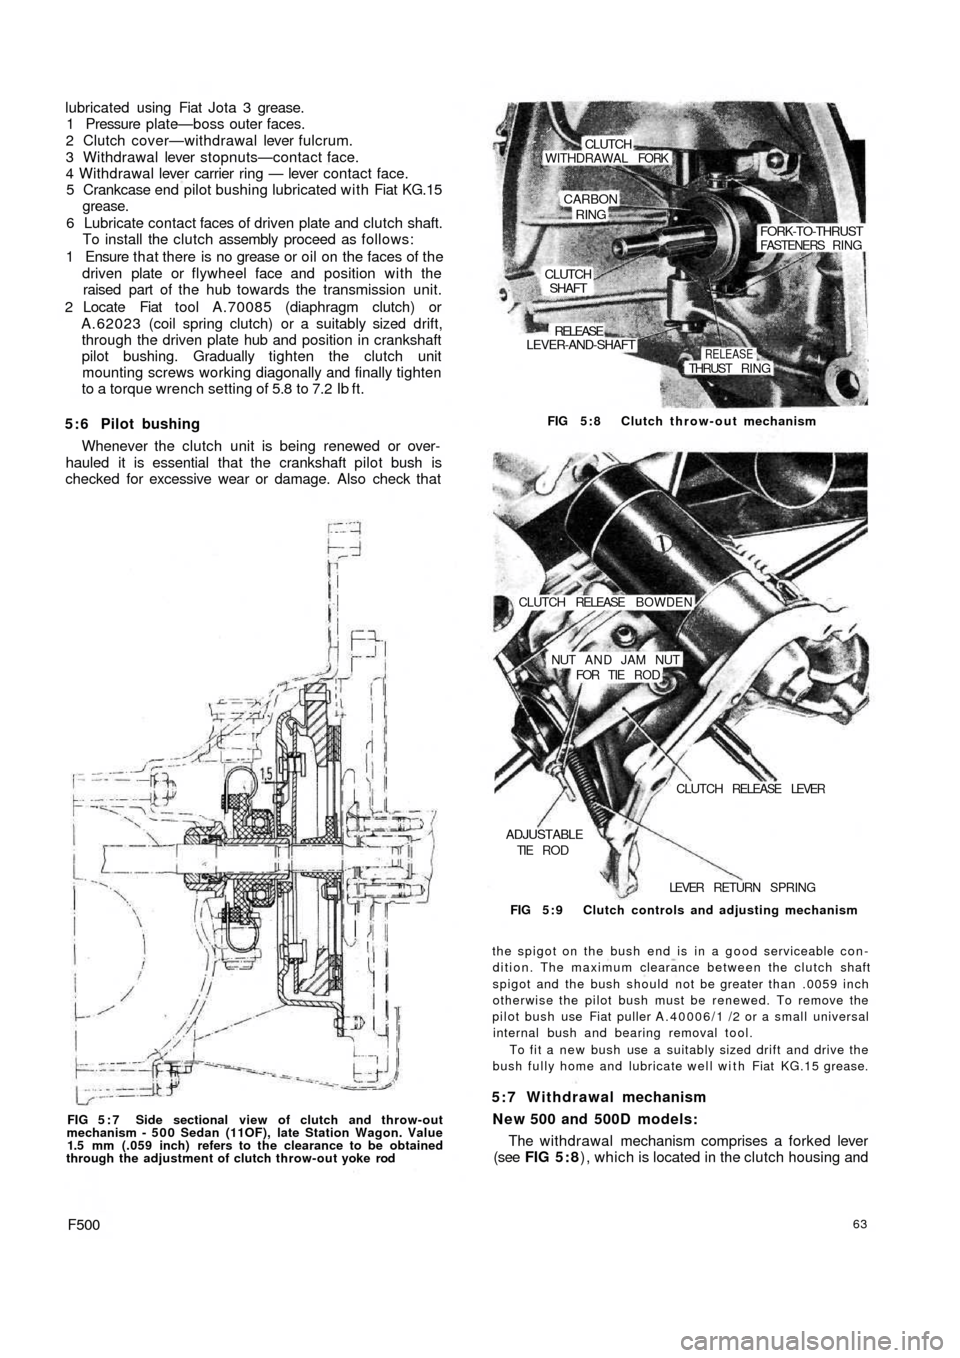 FIAT 500 1960 1.G Workshop Manual lubricated using Fiat Jota 3 grease.
1 Pressure plate—boss outer faces.
2 Clutch cover—withdrawal lever fulcrum.
3 Withdrawal lever stopnuts—contact face.
4 Withdrawal lever carrier ring — lev